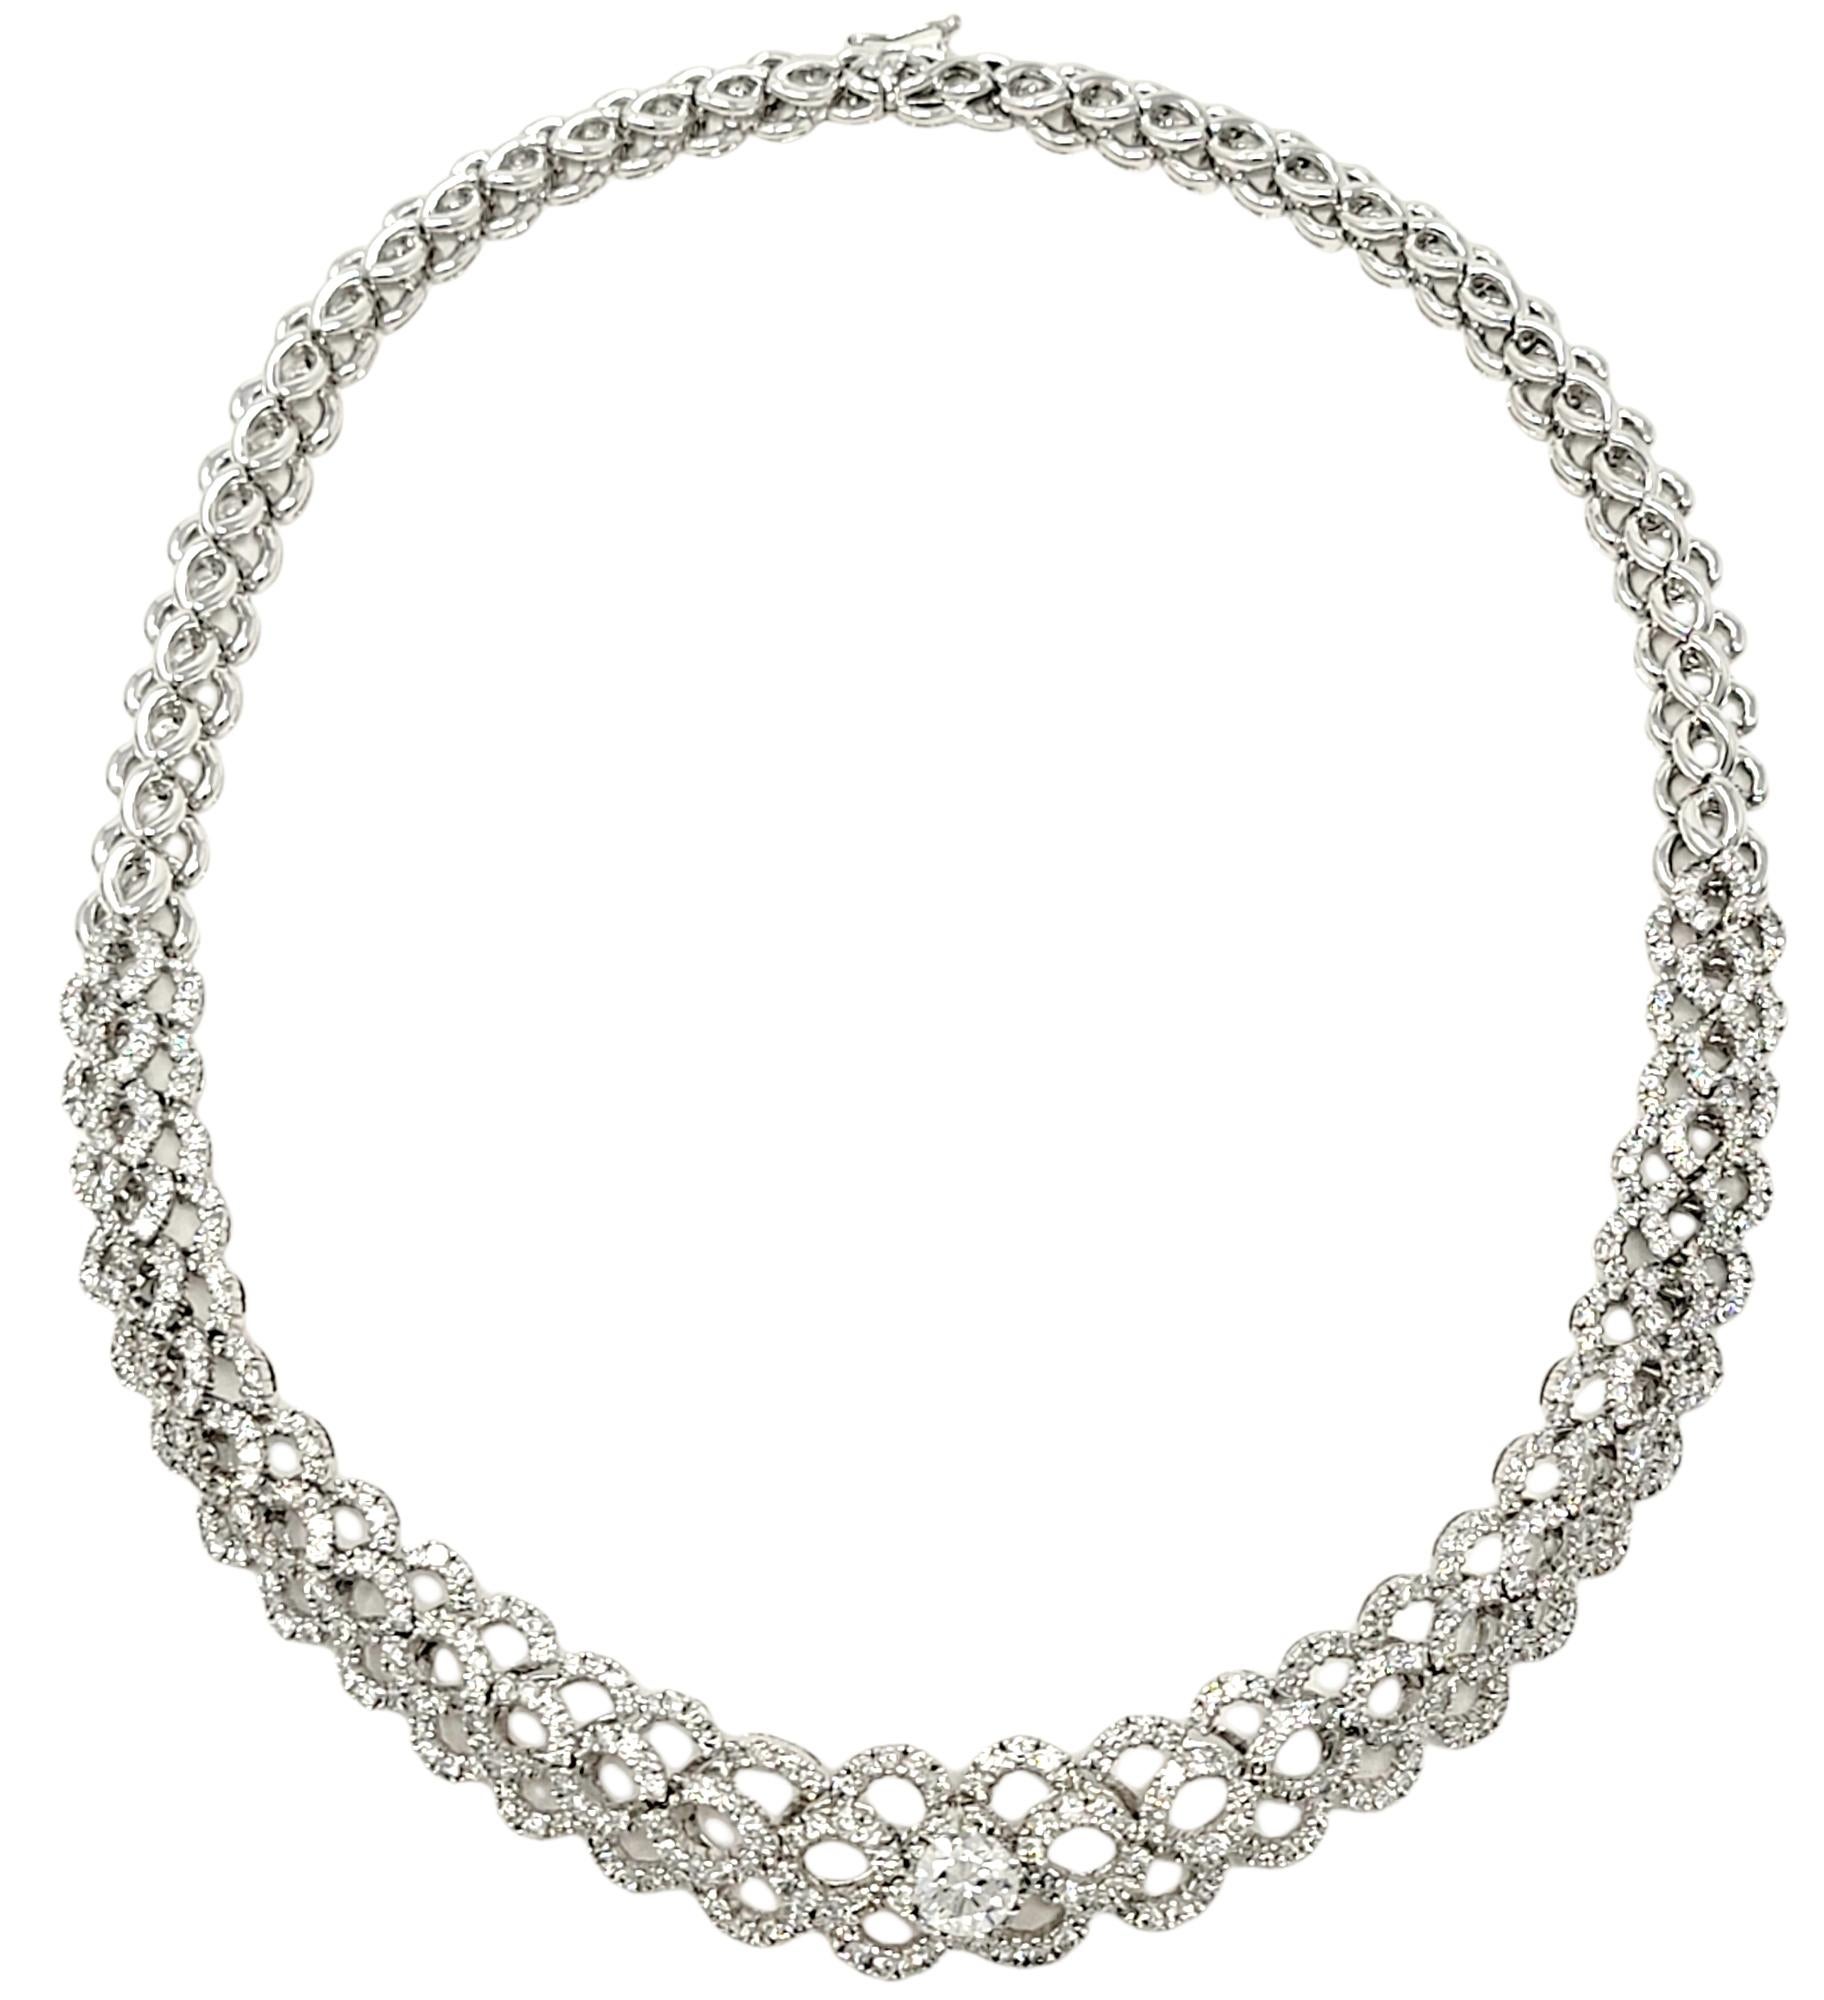 This luxurious, graduated diamond necklace will be your go-to piece for all your special occasions. Its timeless style and feminine design will elevate any look that it's paired with. It offers incredible sparkle without being over the top and